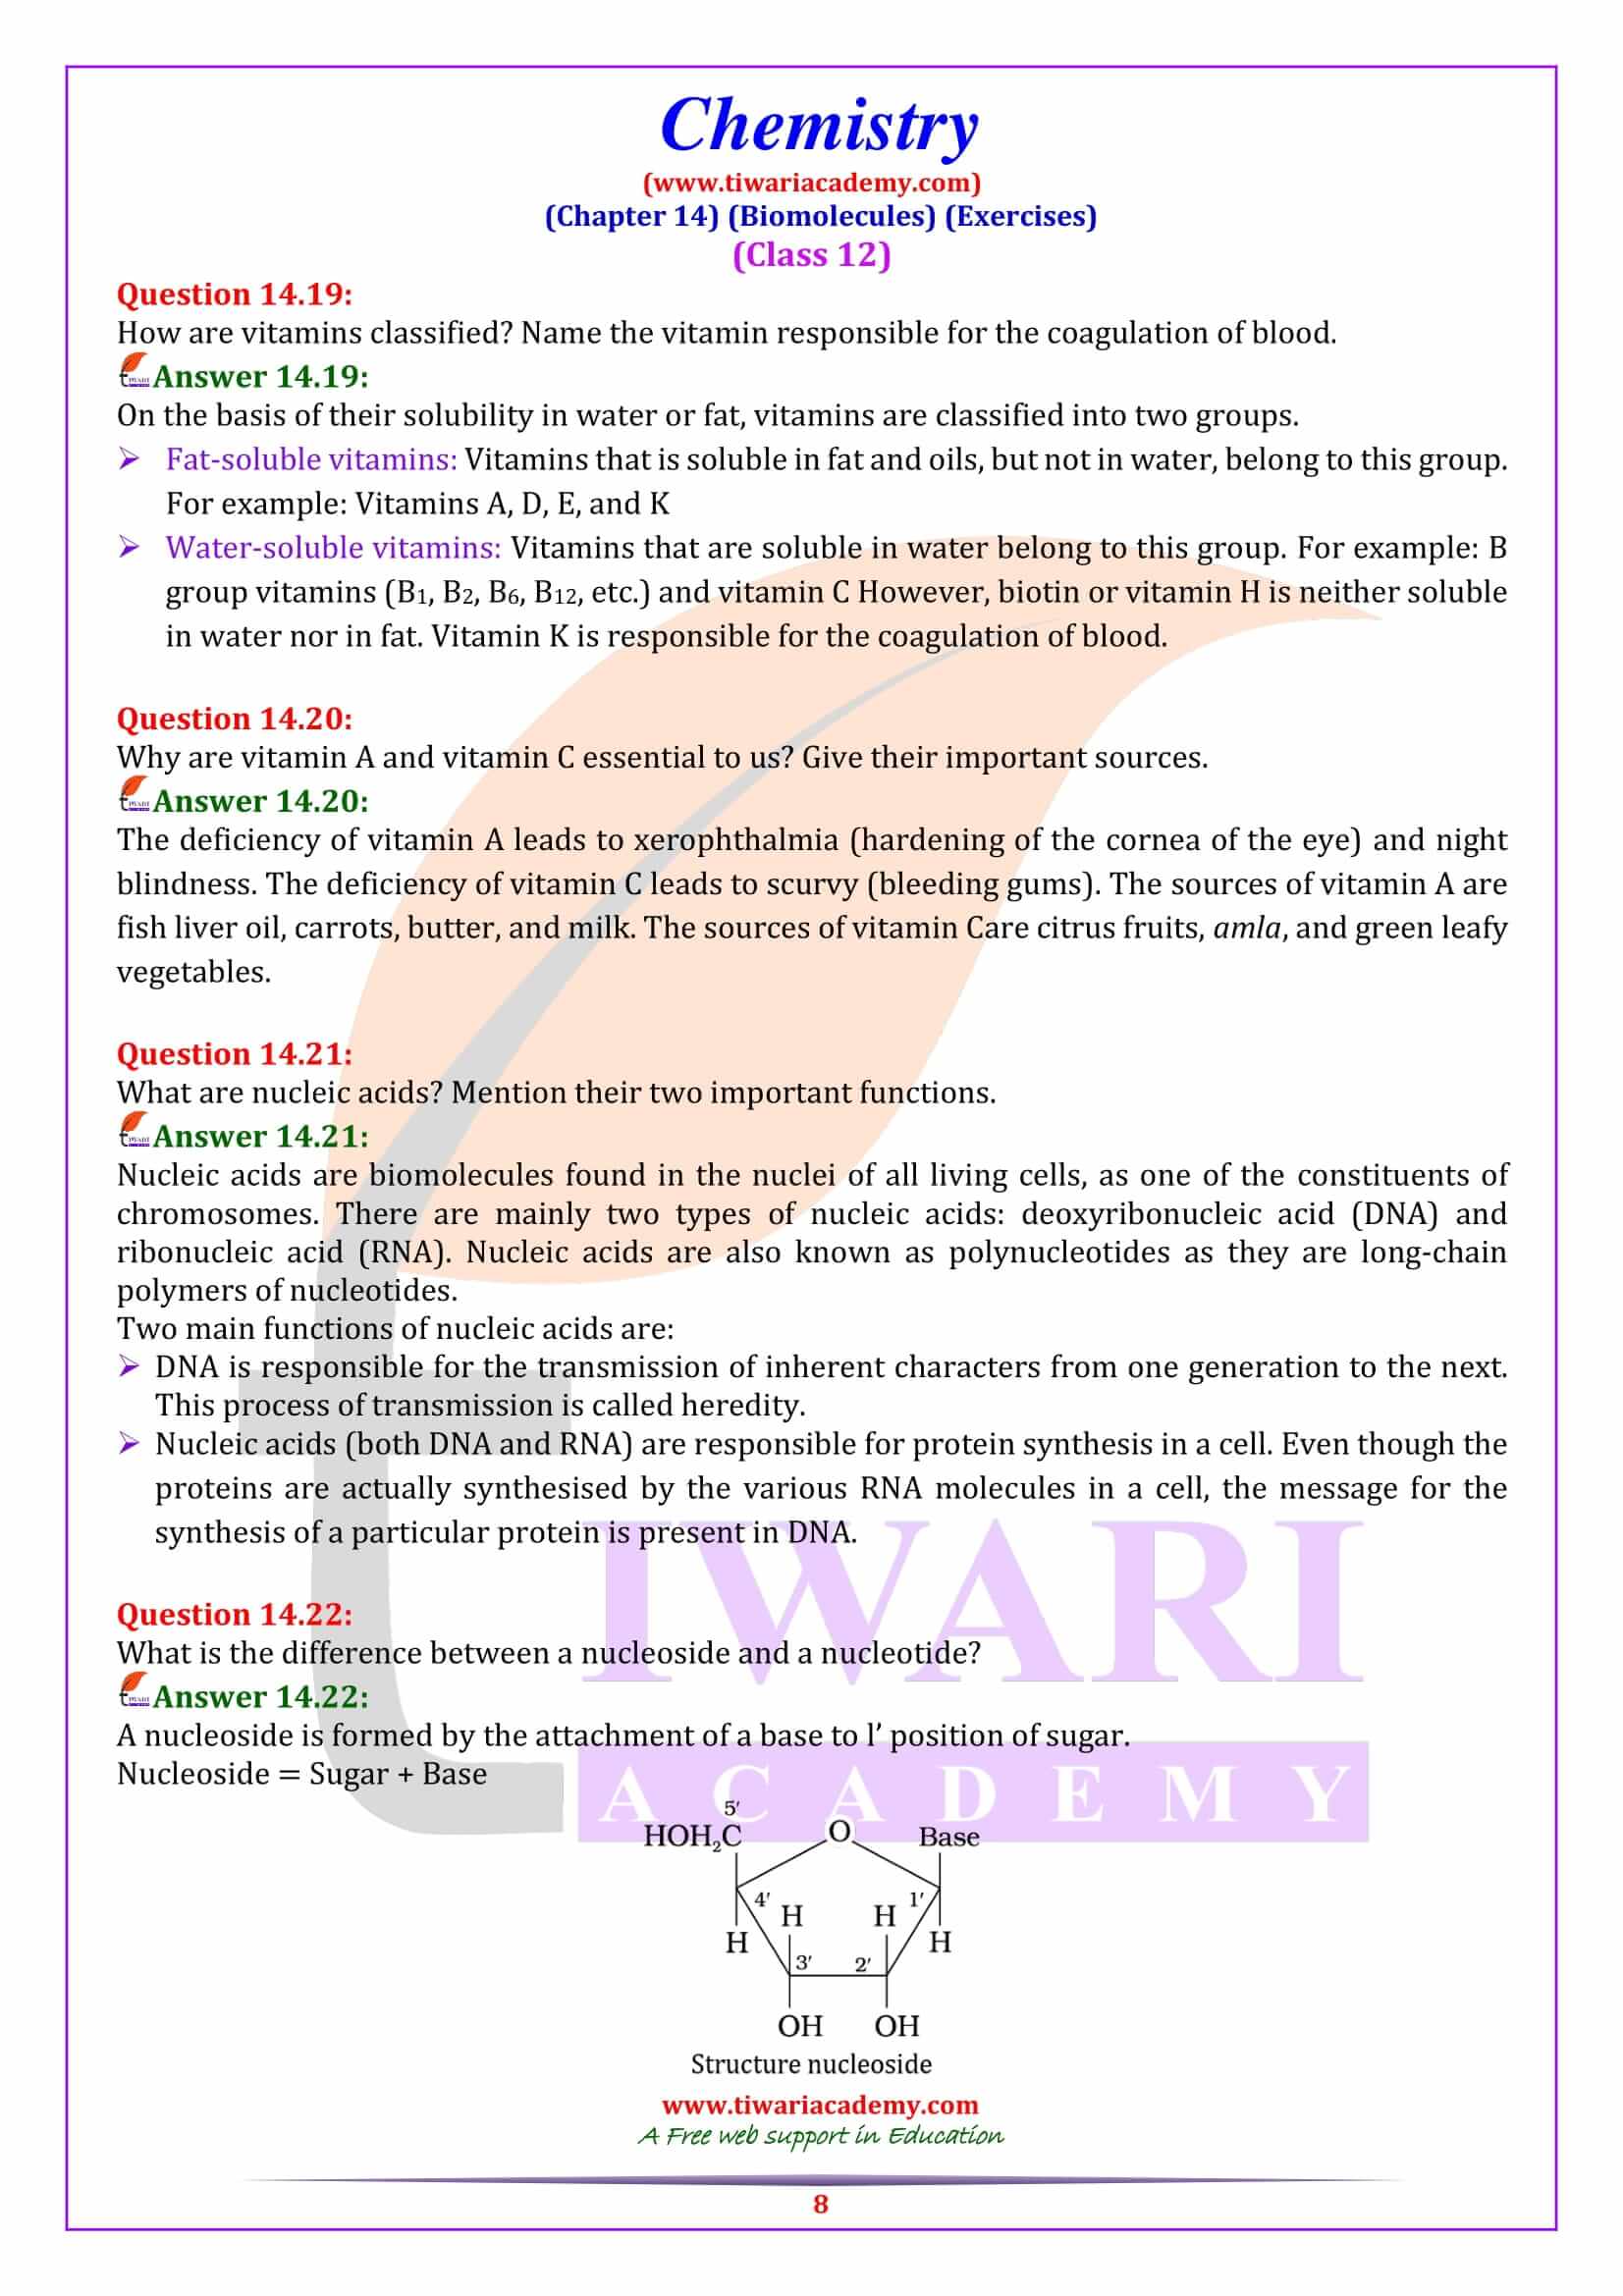 NCERT Solutions for Class 12 Chemistry Chapter 14 Exercise answers